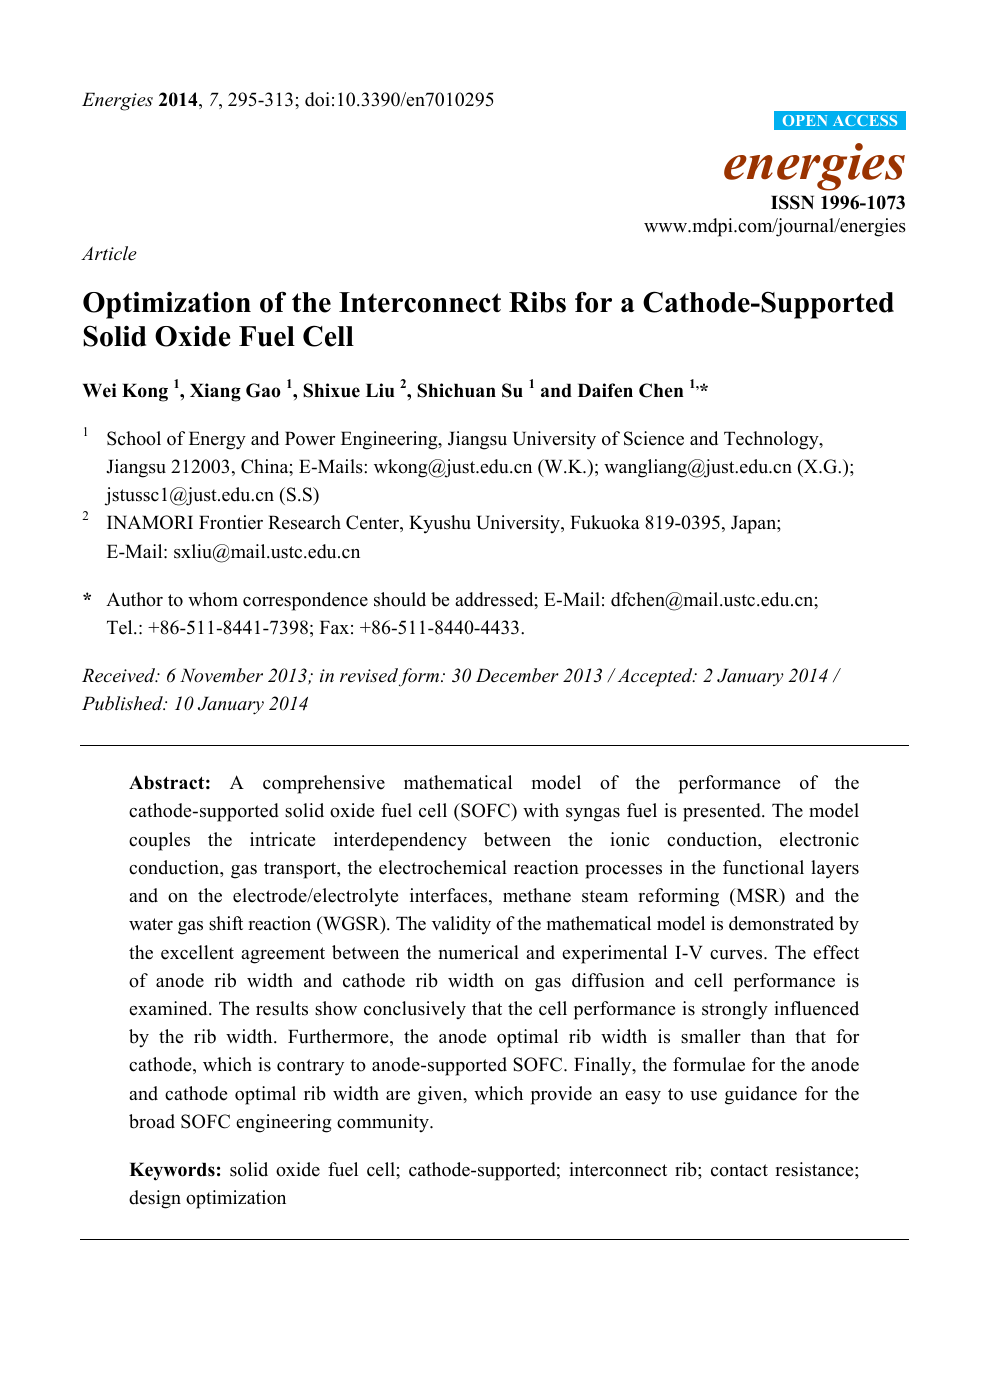 Optimization Of The Interconnect Ribs For A Cathode Supported Solid Oxide Fuel Cell Topic Of Research Paper In Chemical Engineering Download Scholarly Article Pdf And Read For Free On Cyberleninka Open Science